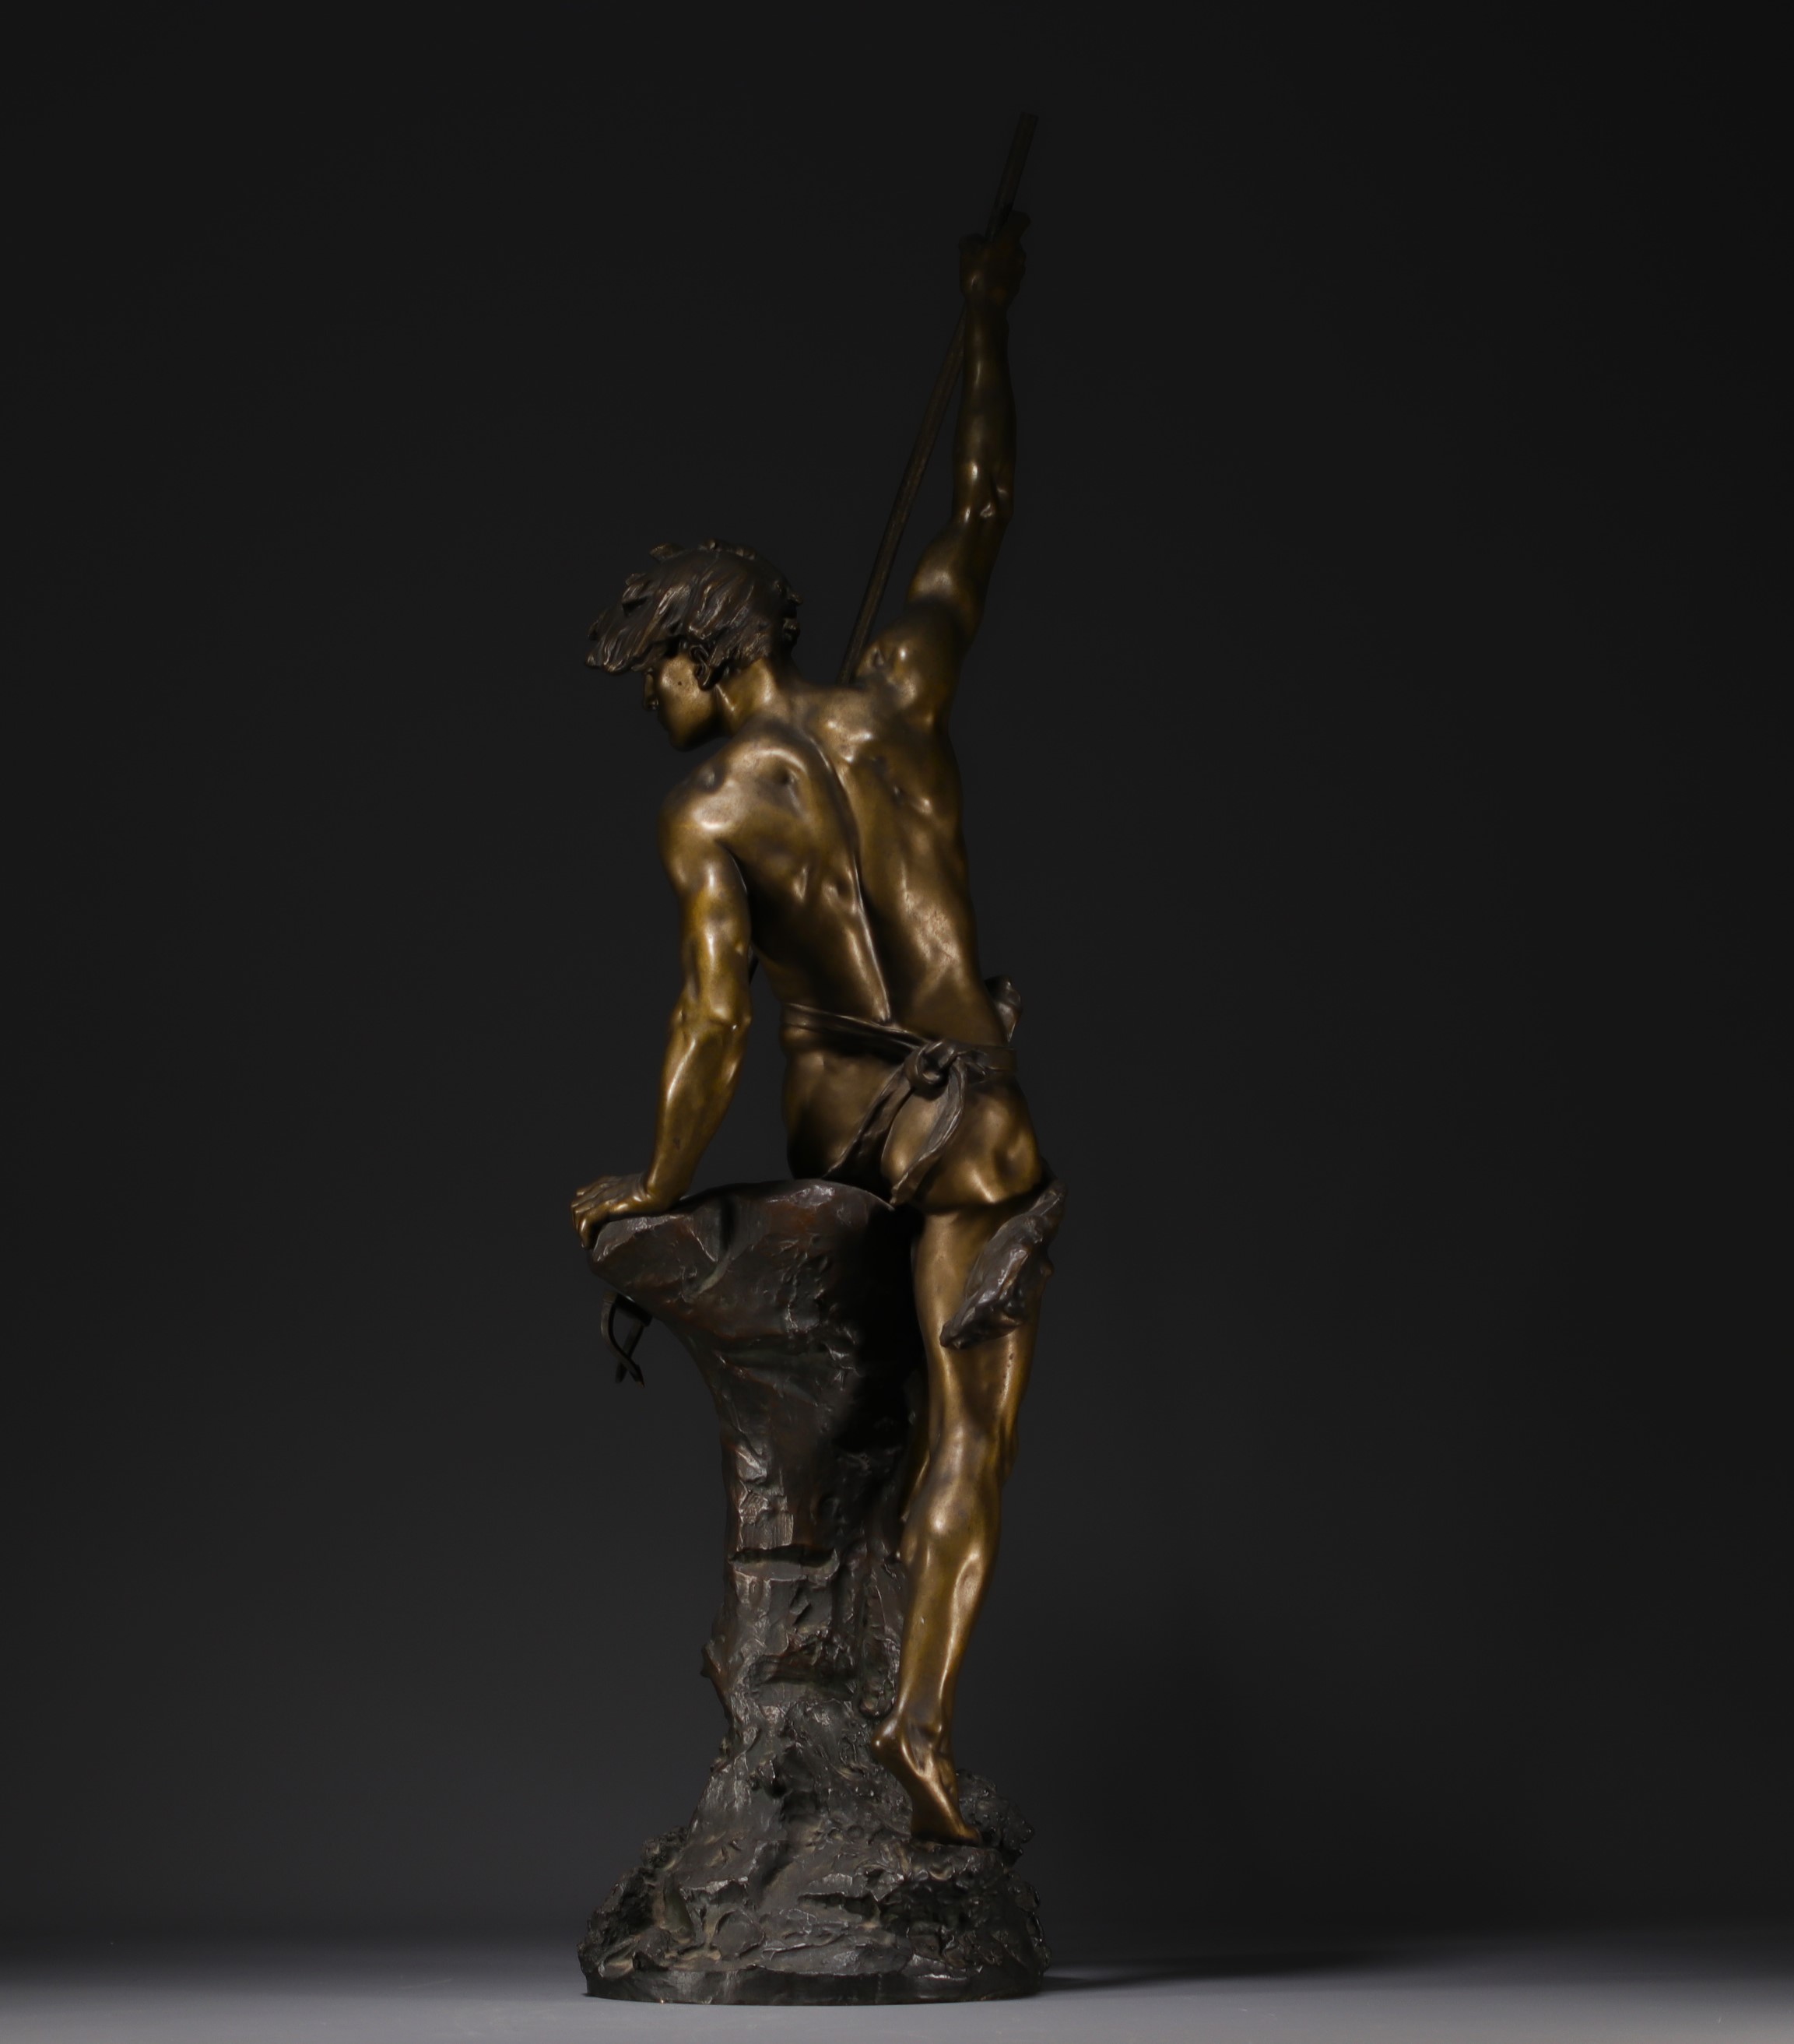 Ernest Justin FERRAND (1846-1932) "The young sinner" Sculpture in chased and patinated bronze. - Image 5 of 7